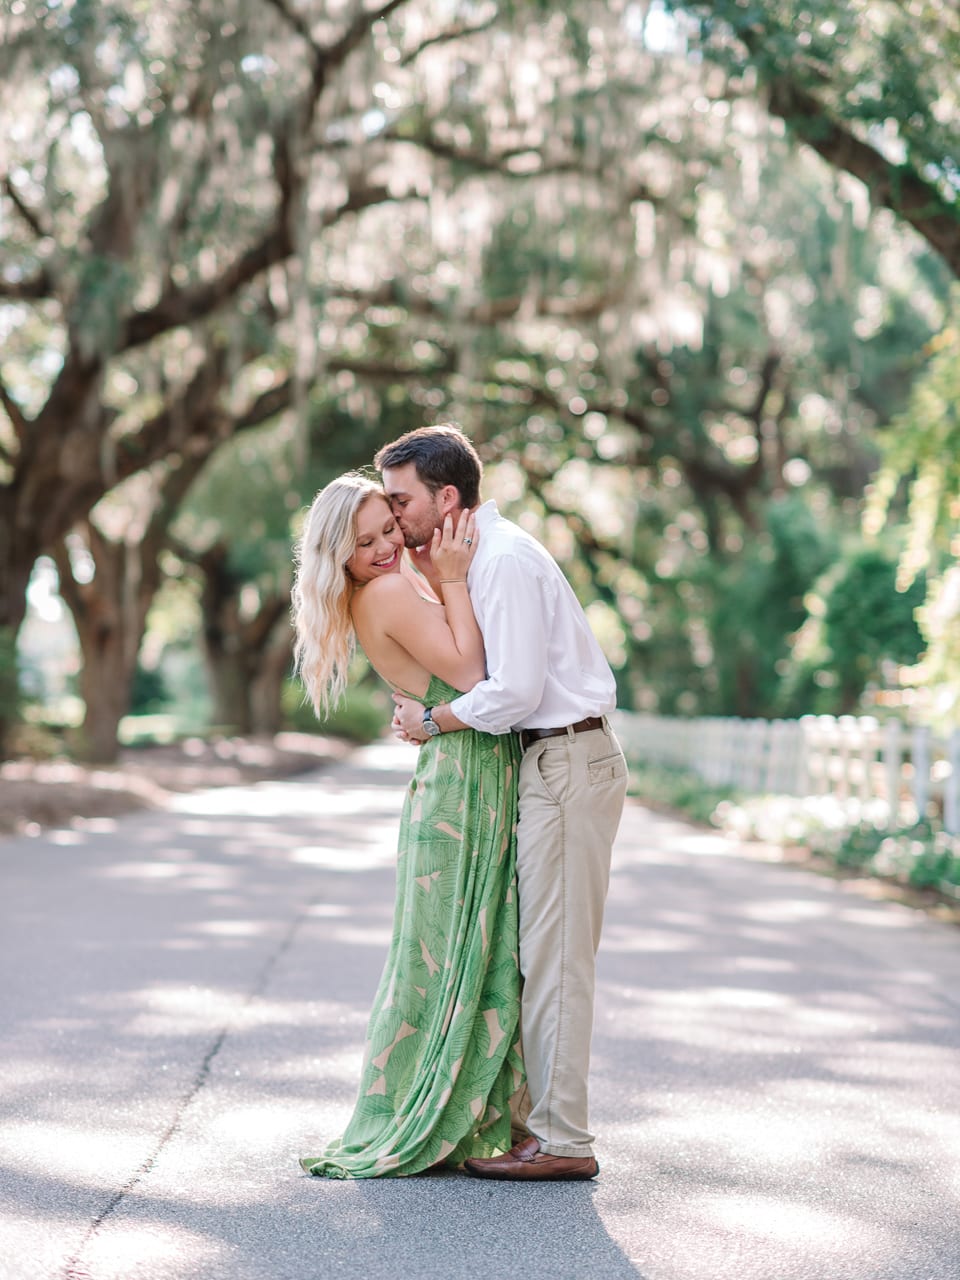 Engagement Photographer - Engagement Pictures by Pasha Belman in Pawleys Island SC